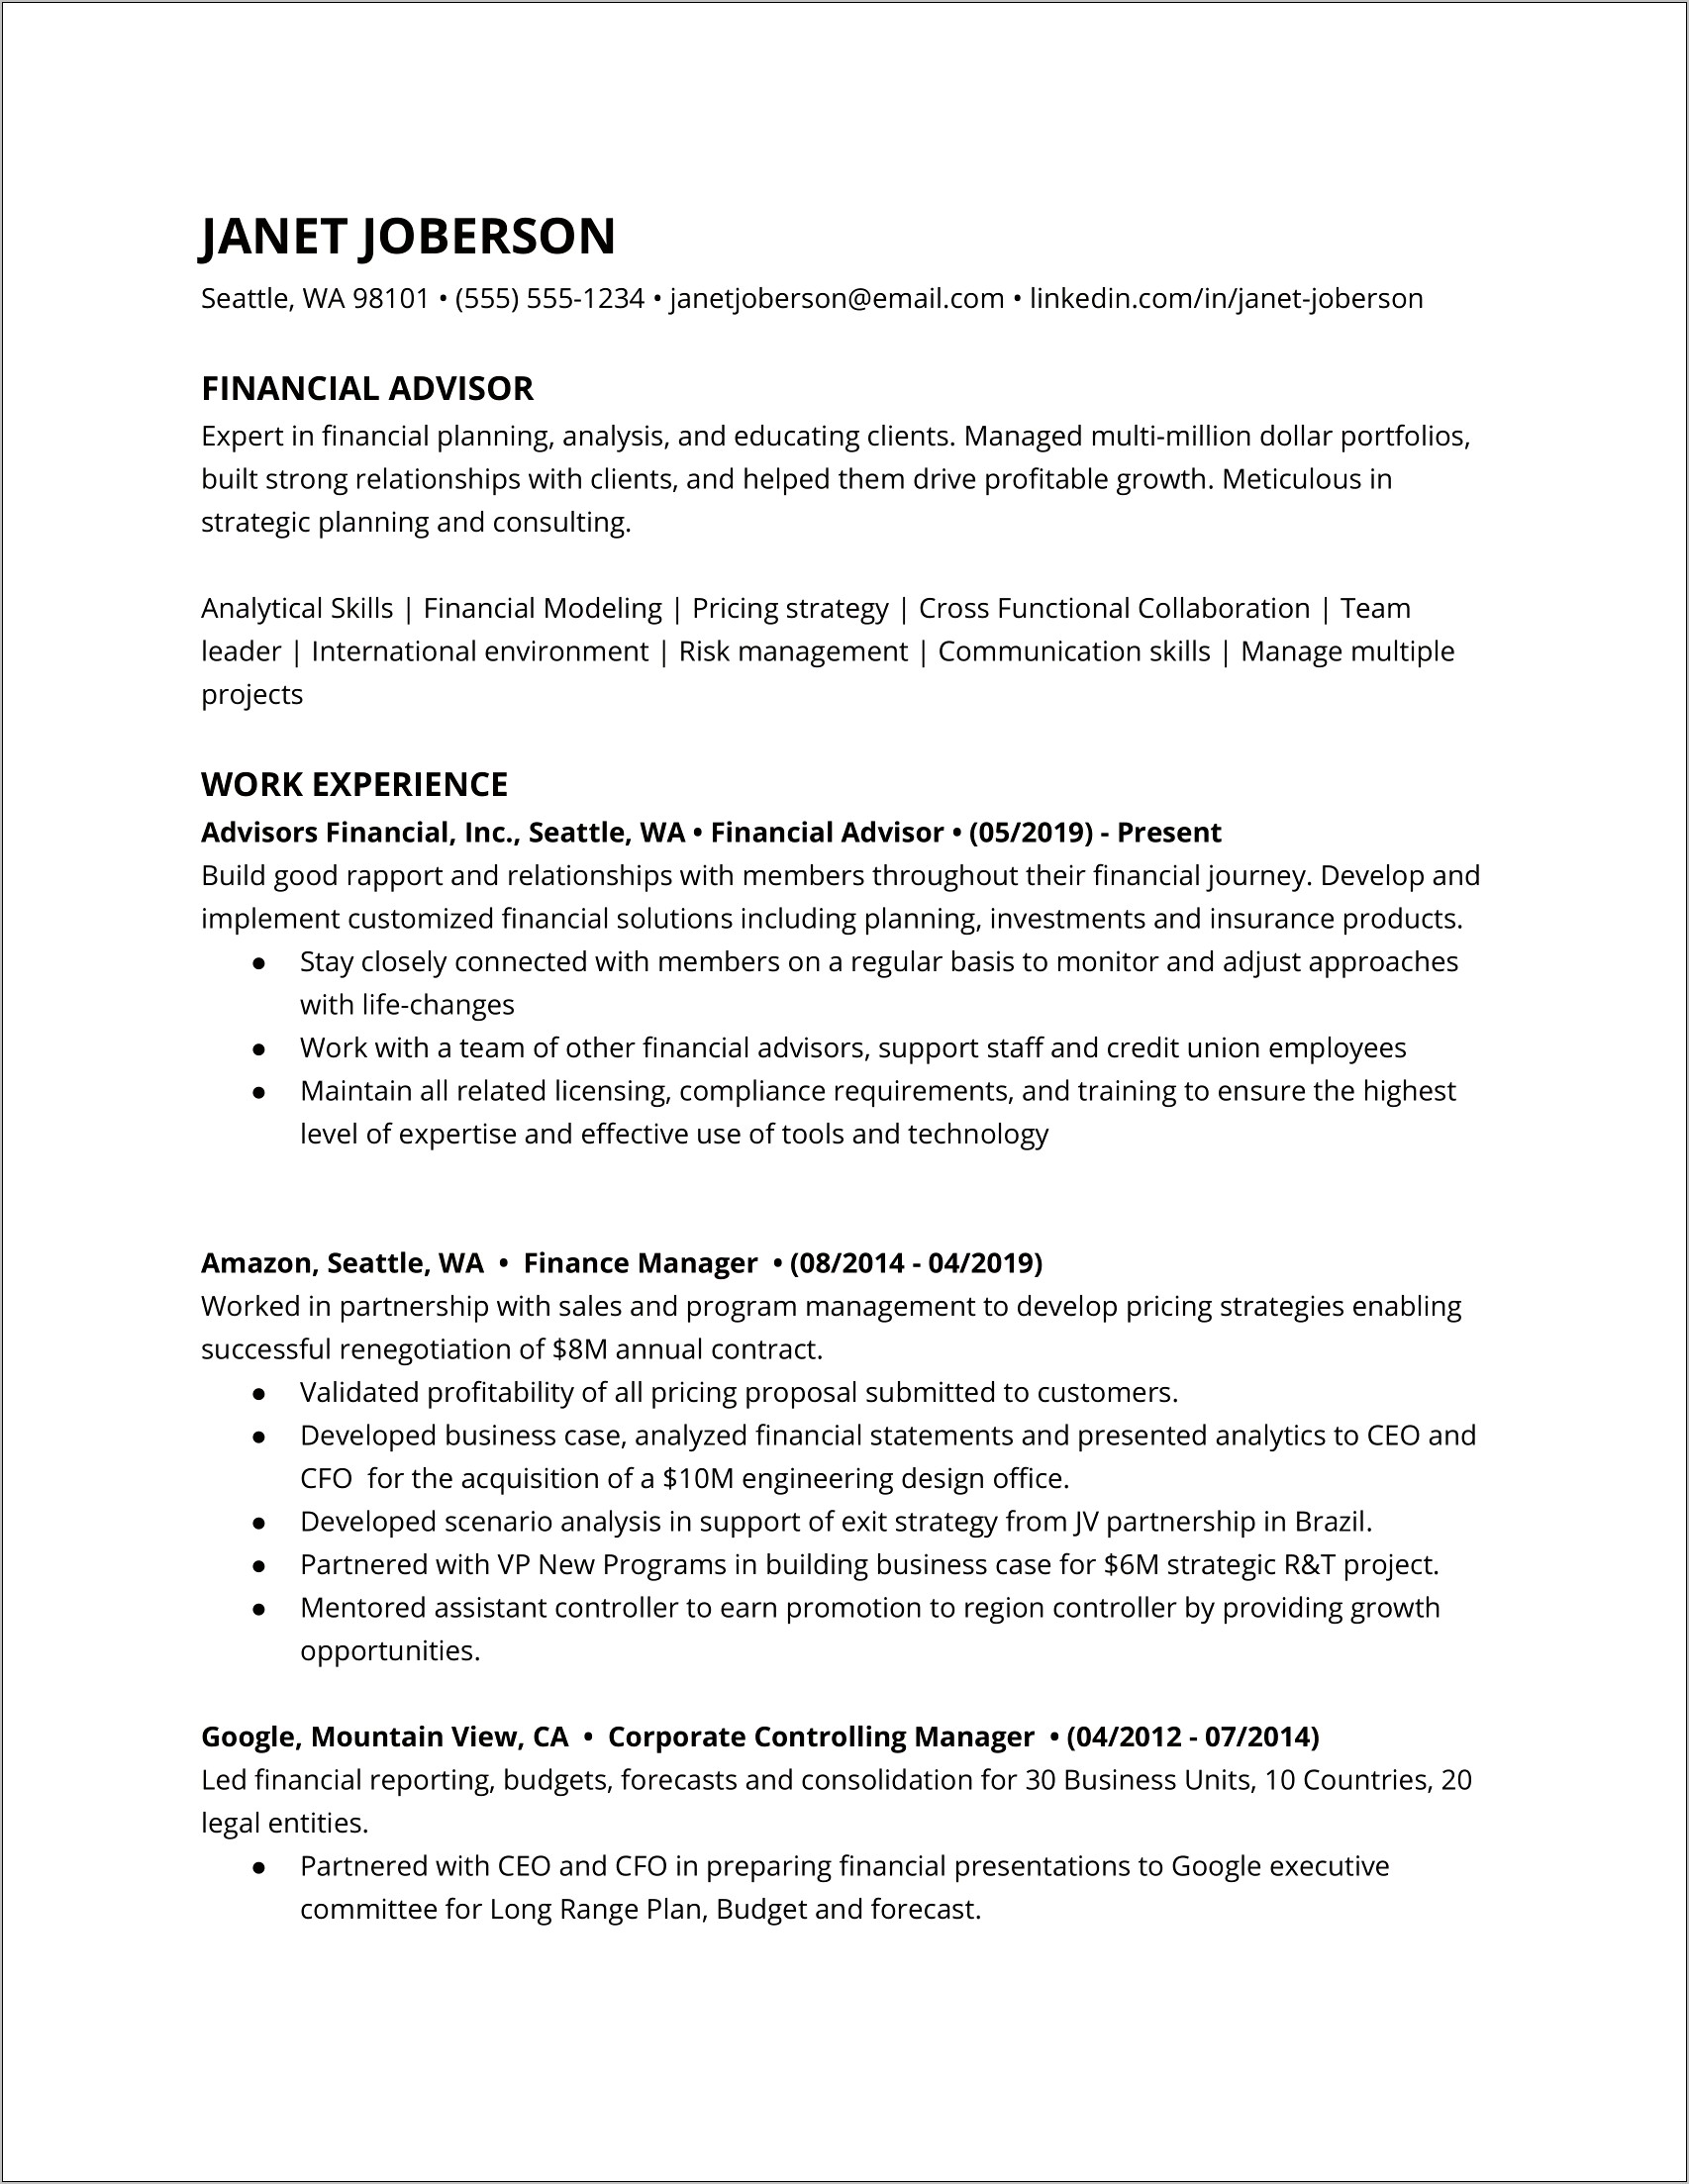 Financial Planning Analysis Resume Examples